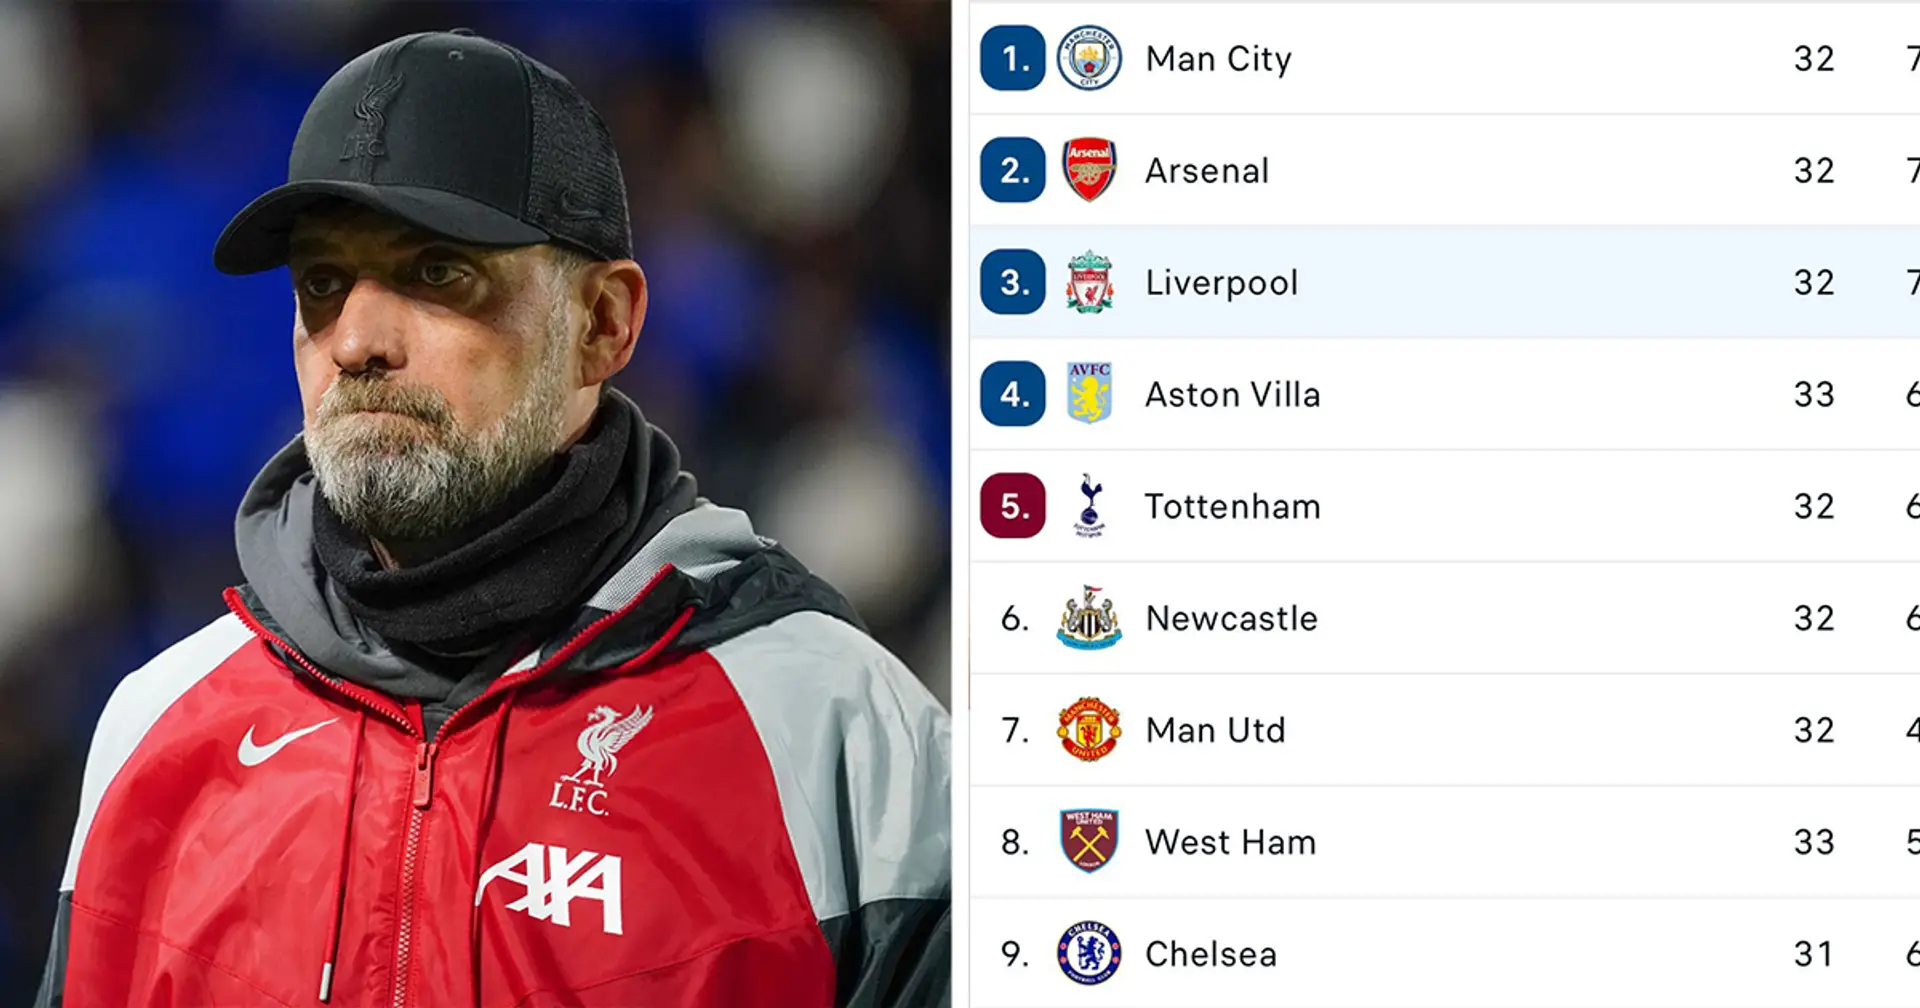 Moving on to Premier League: a look at Liverpool's next 5 fixtures